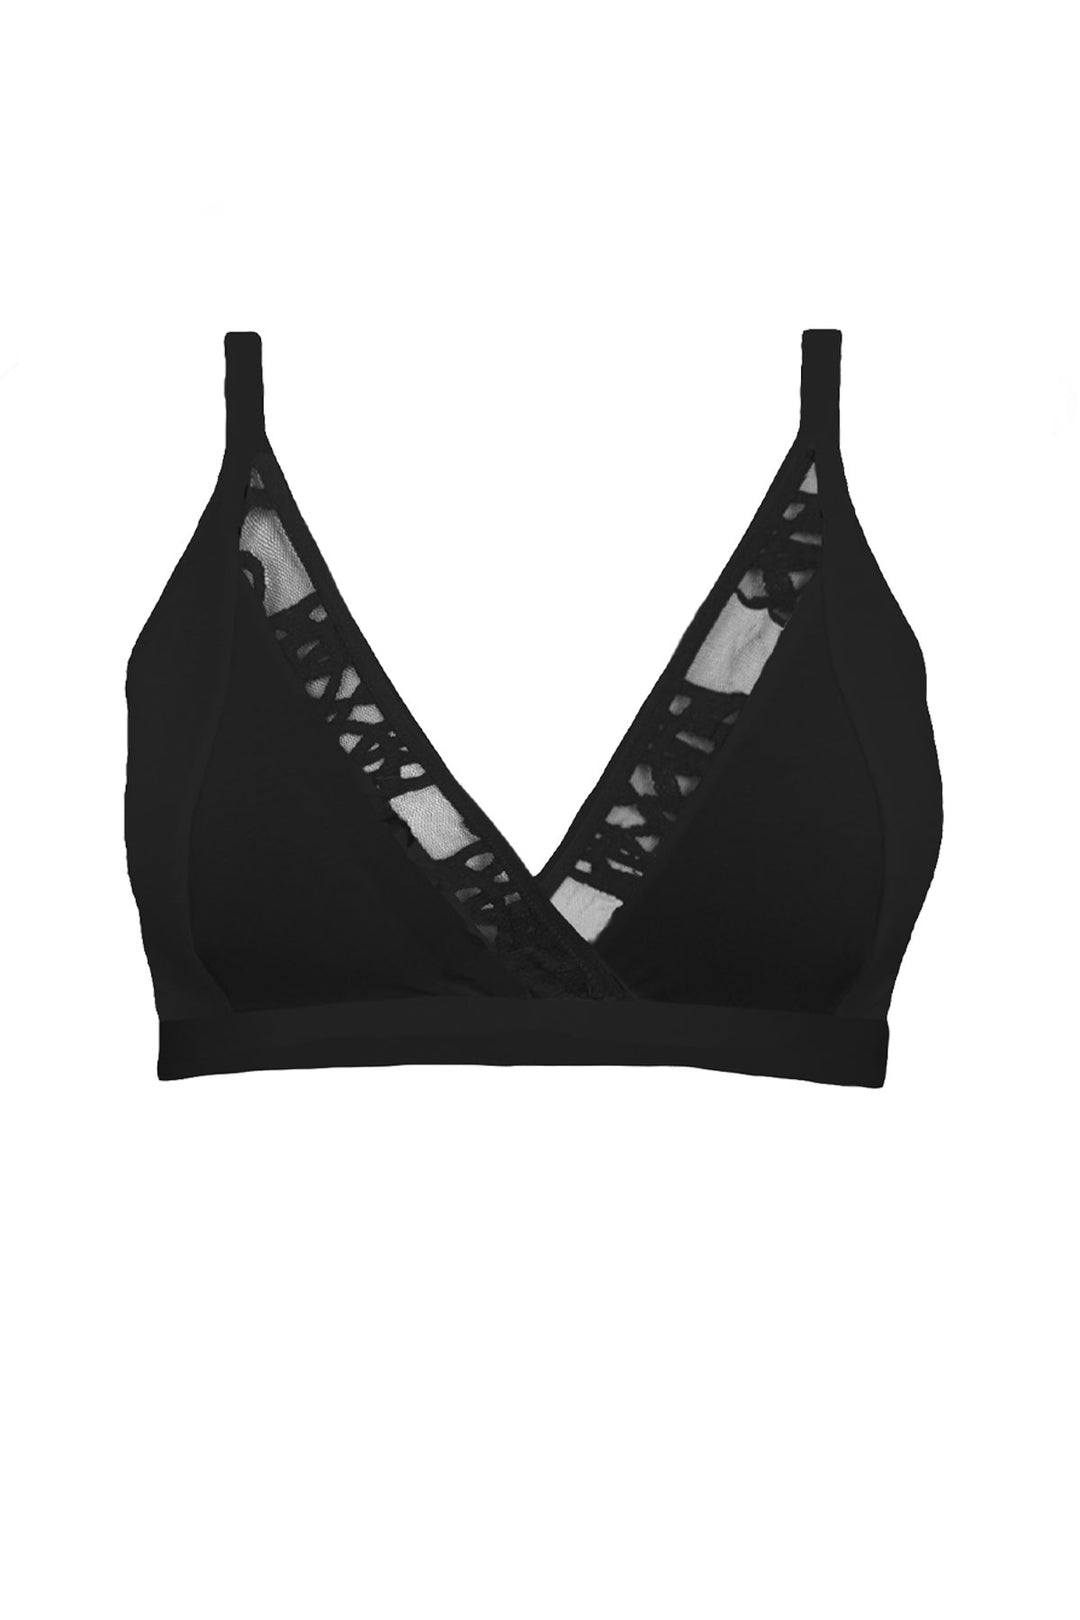 black bra, black lace trim soft cup bra for large breasts, wireless support